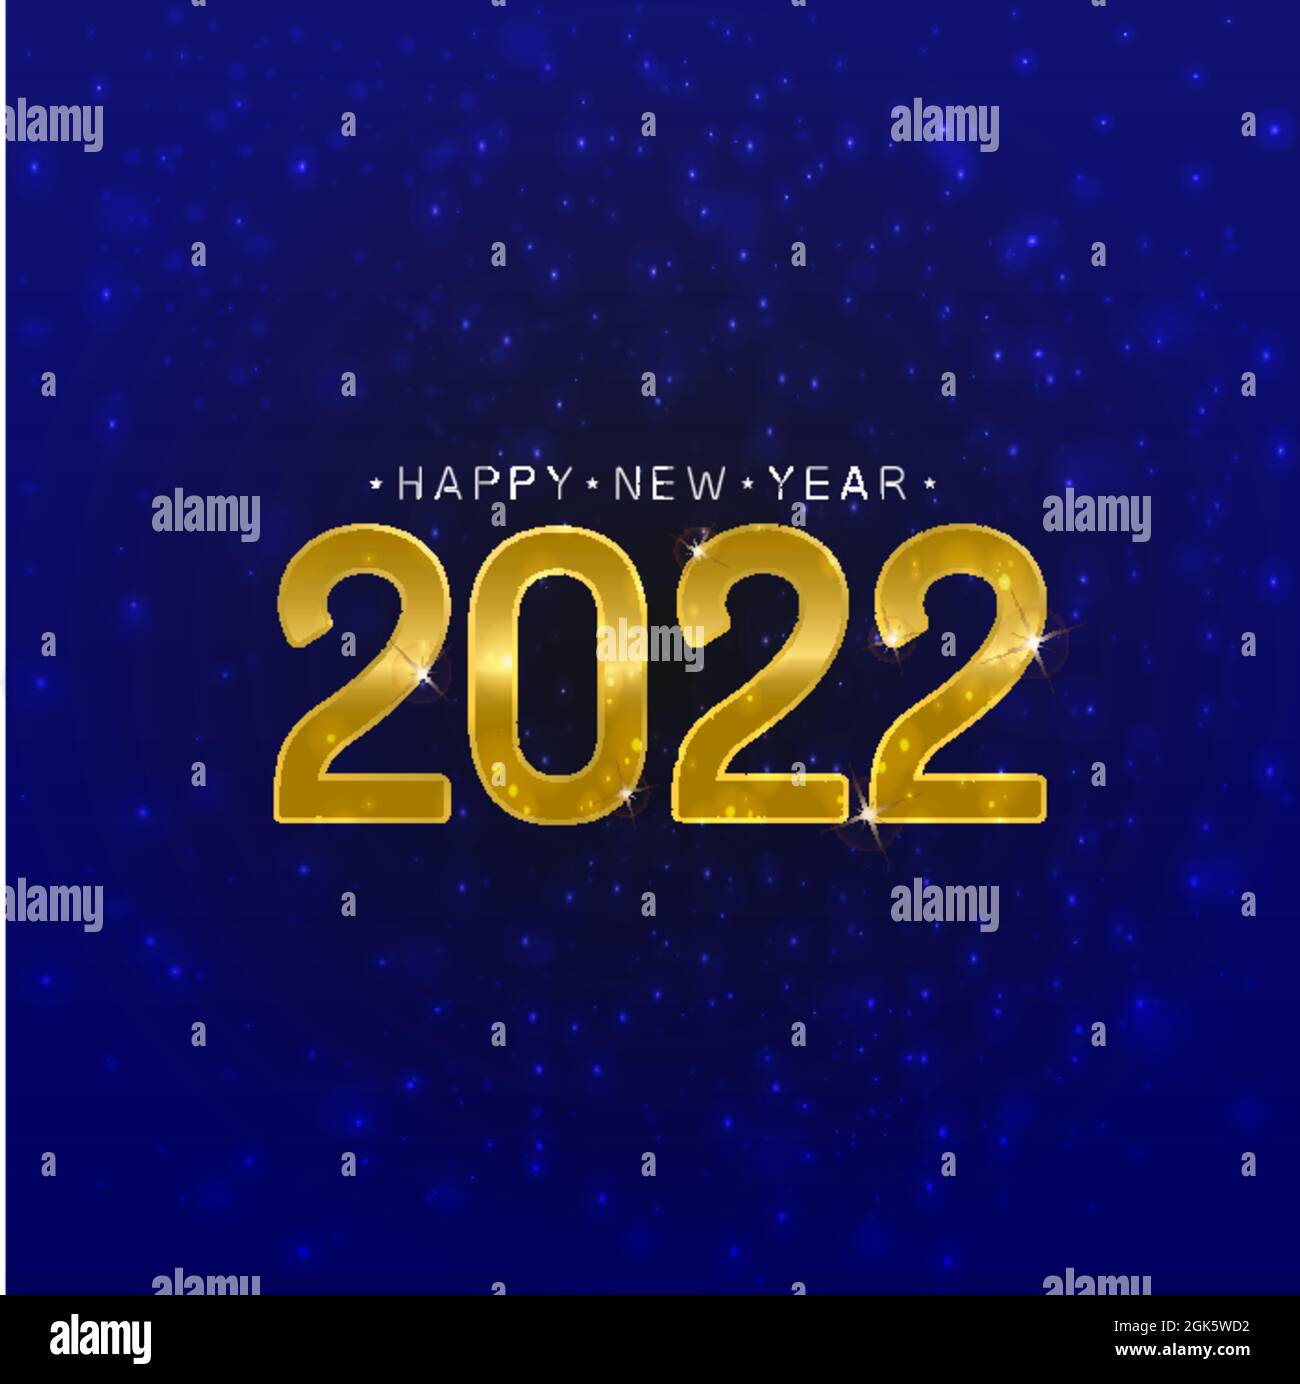 With gold colored 2022 New year text message on blue galaxy background vector illustration Stock Vector